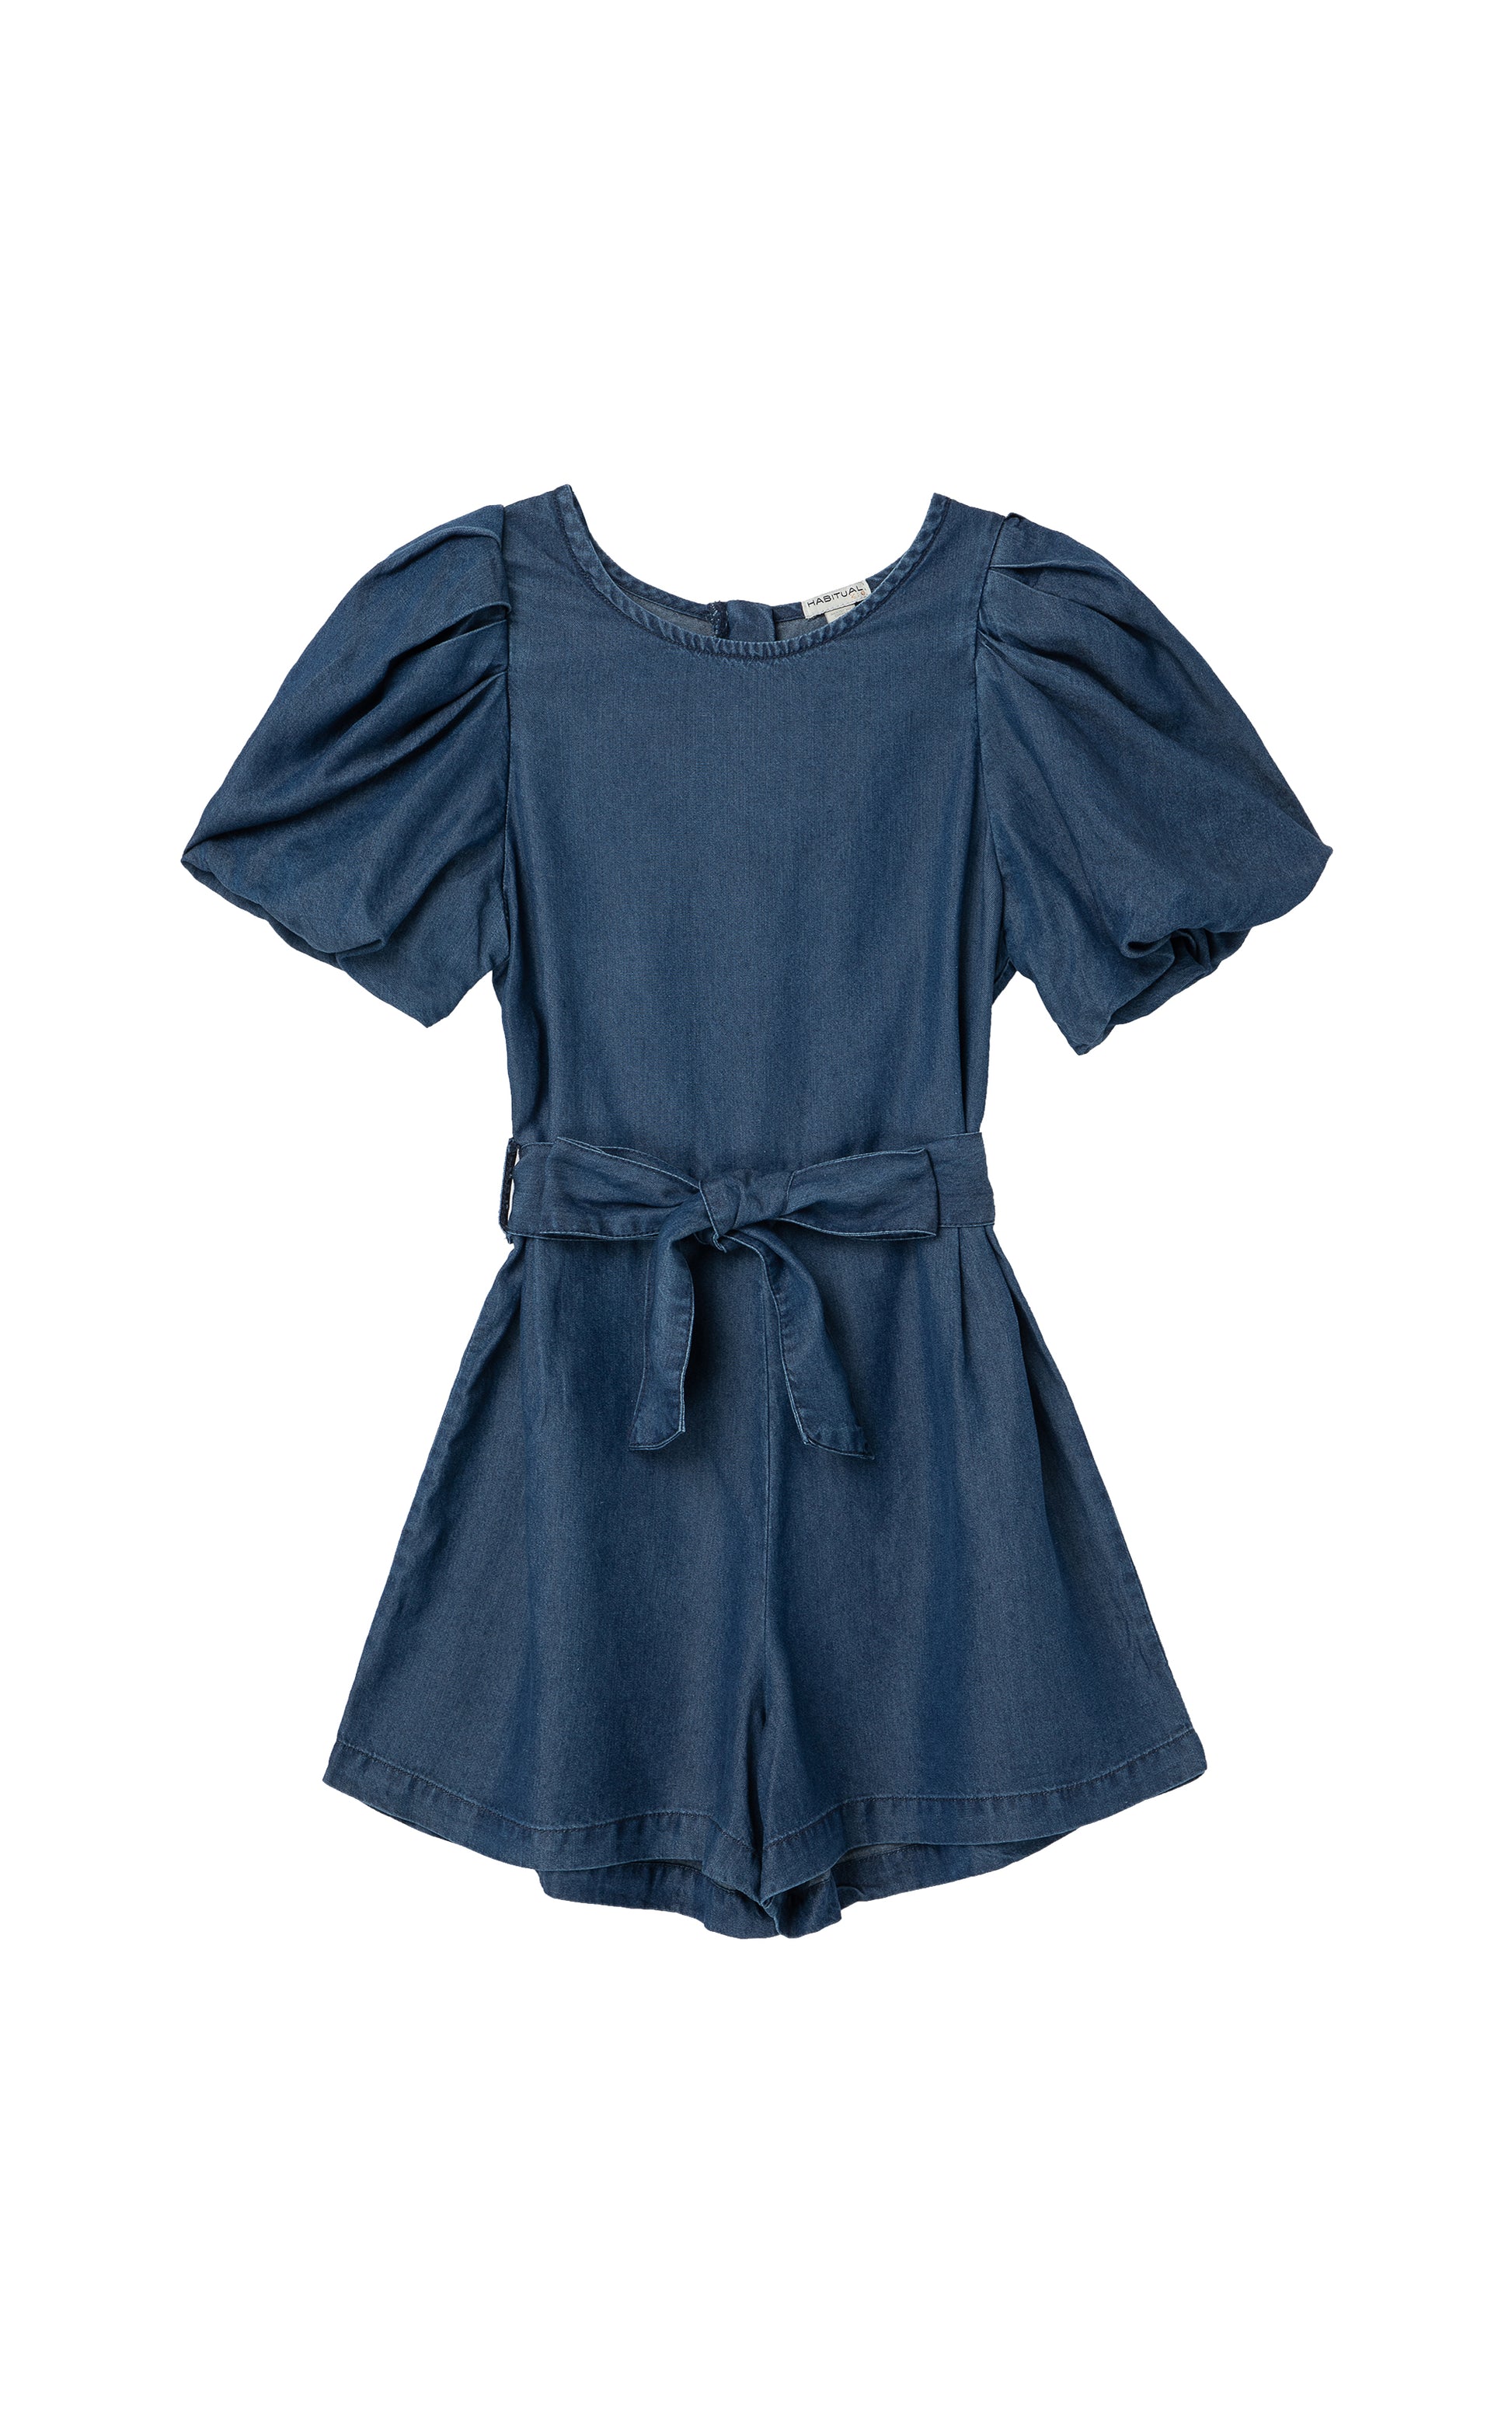 Denim exaggerated sleeve romper with ties